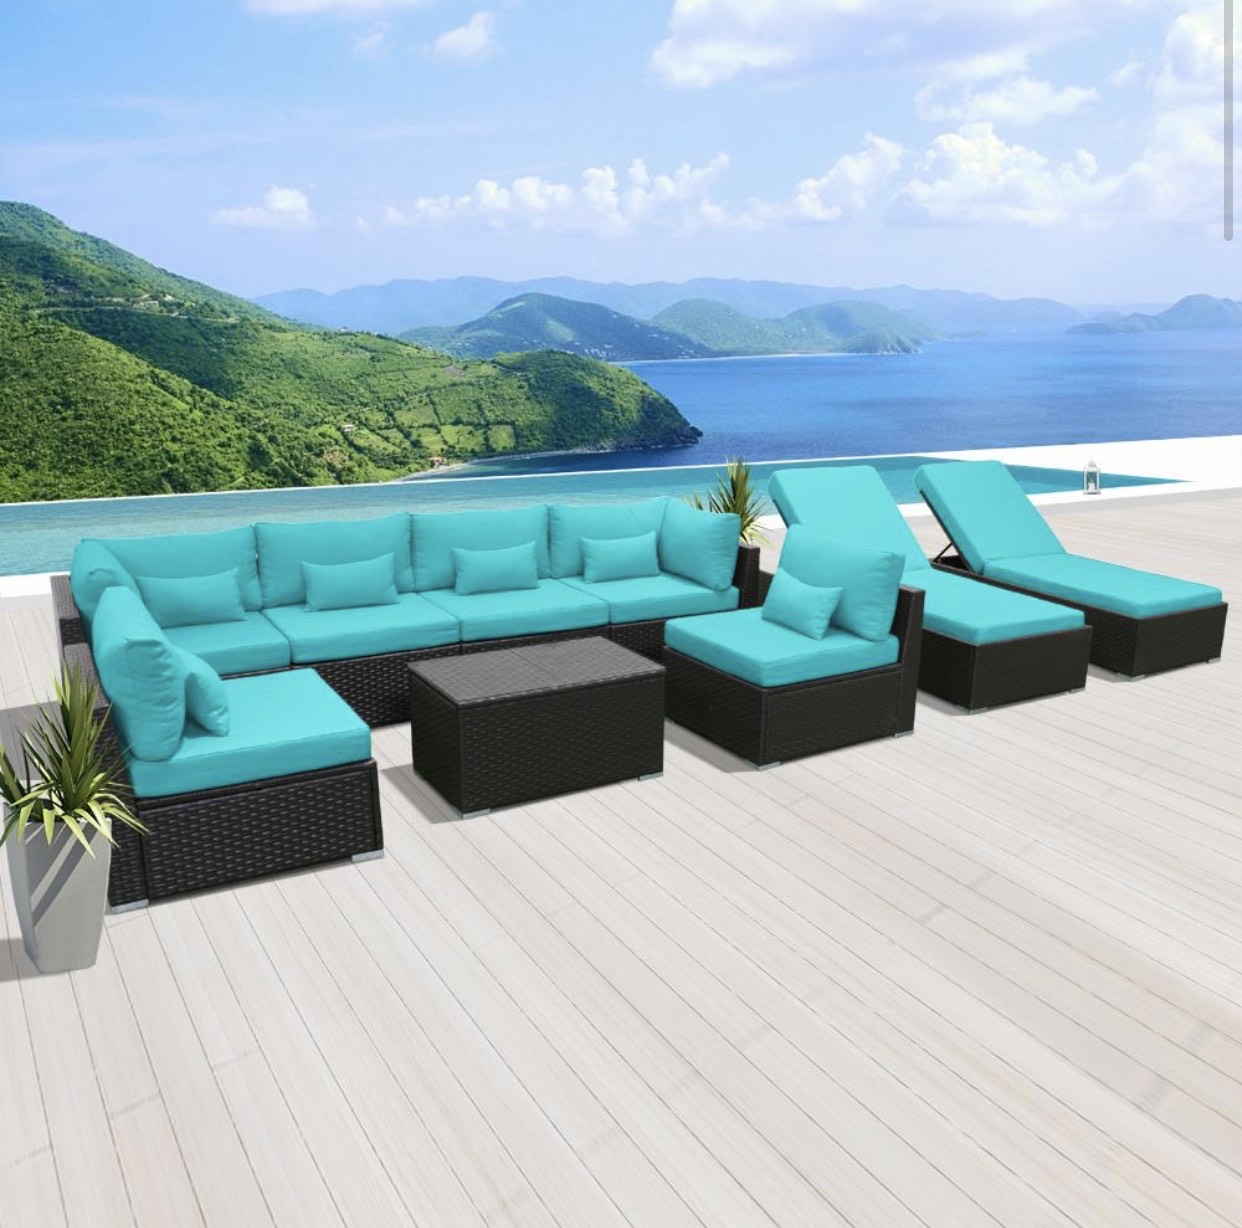 Blue Turquoise 7G2A Replacement Cushion Cover Outdoor Patio Wicker Sofa Furniture Set (Without Foam Insis)